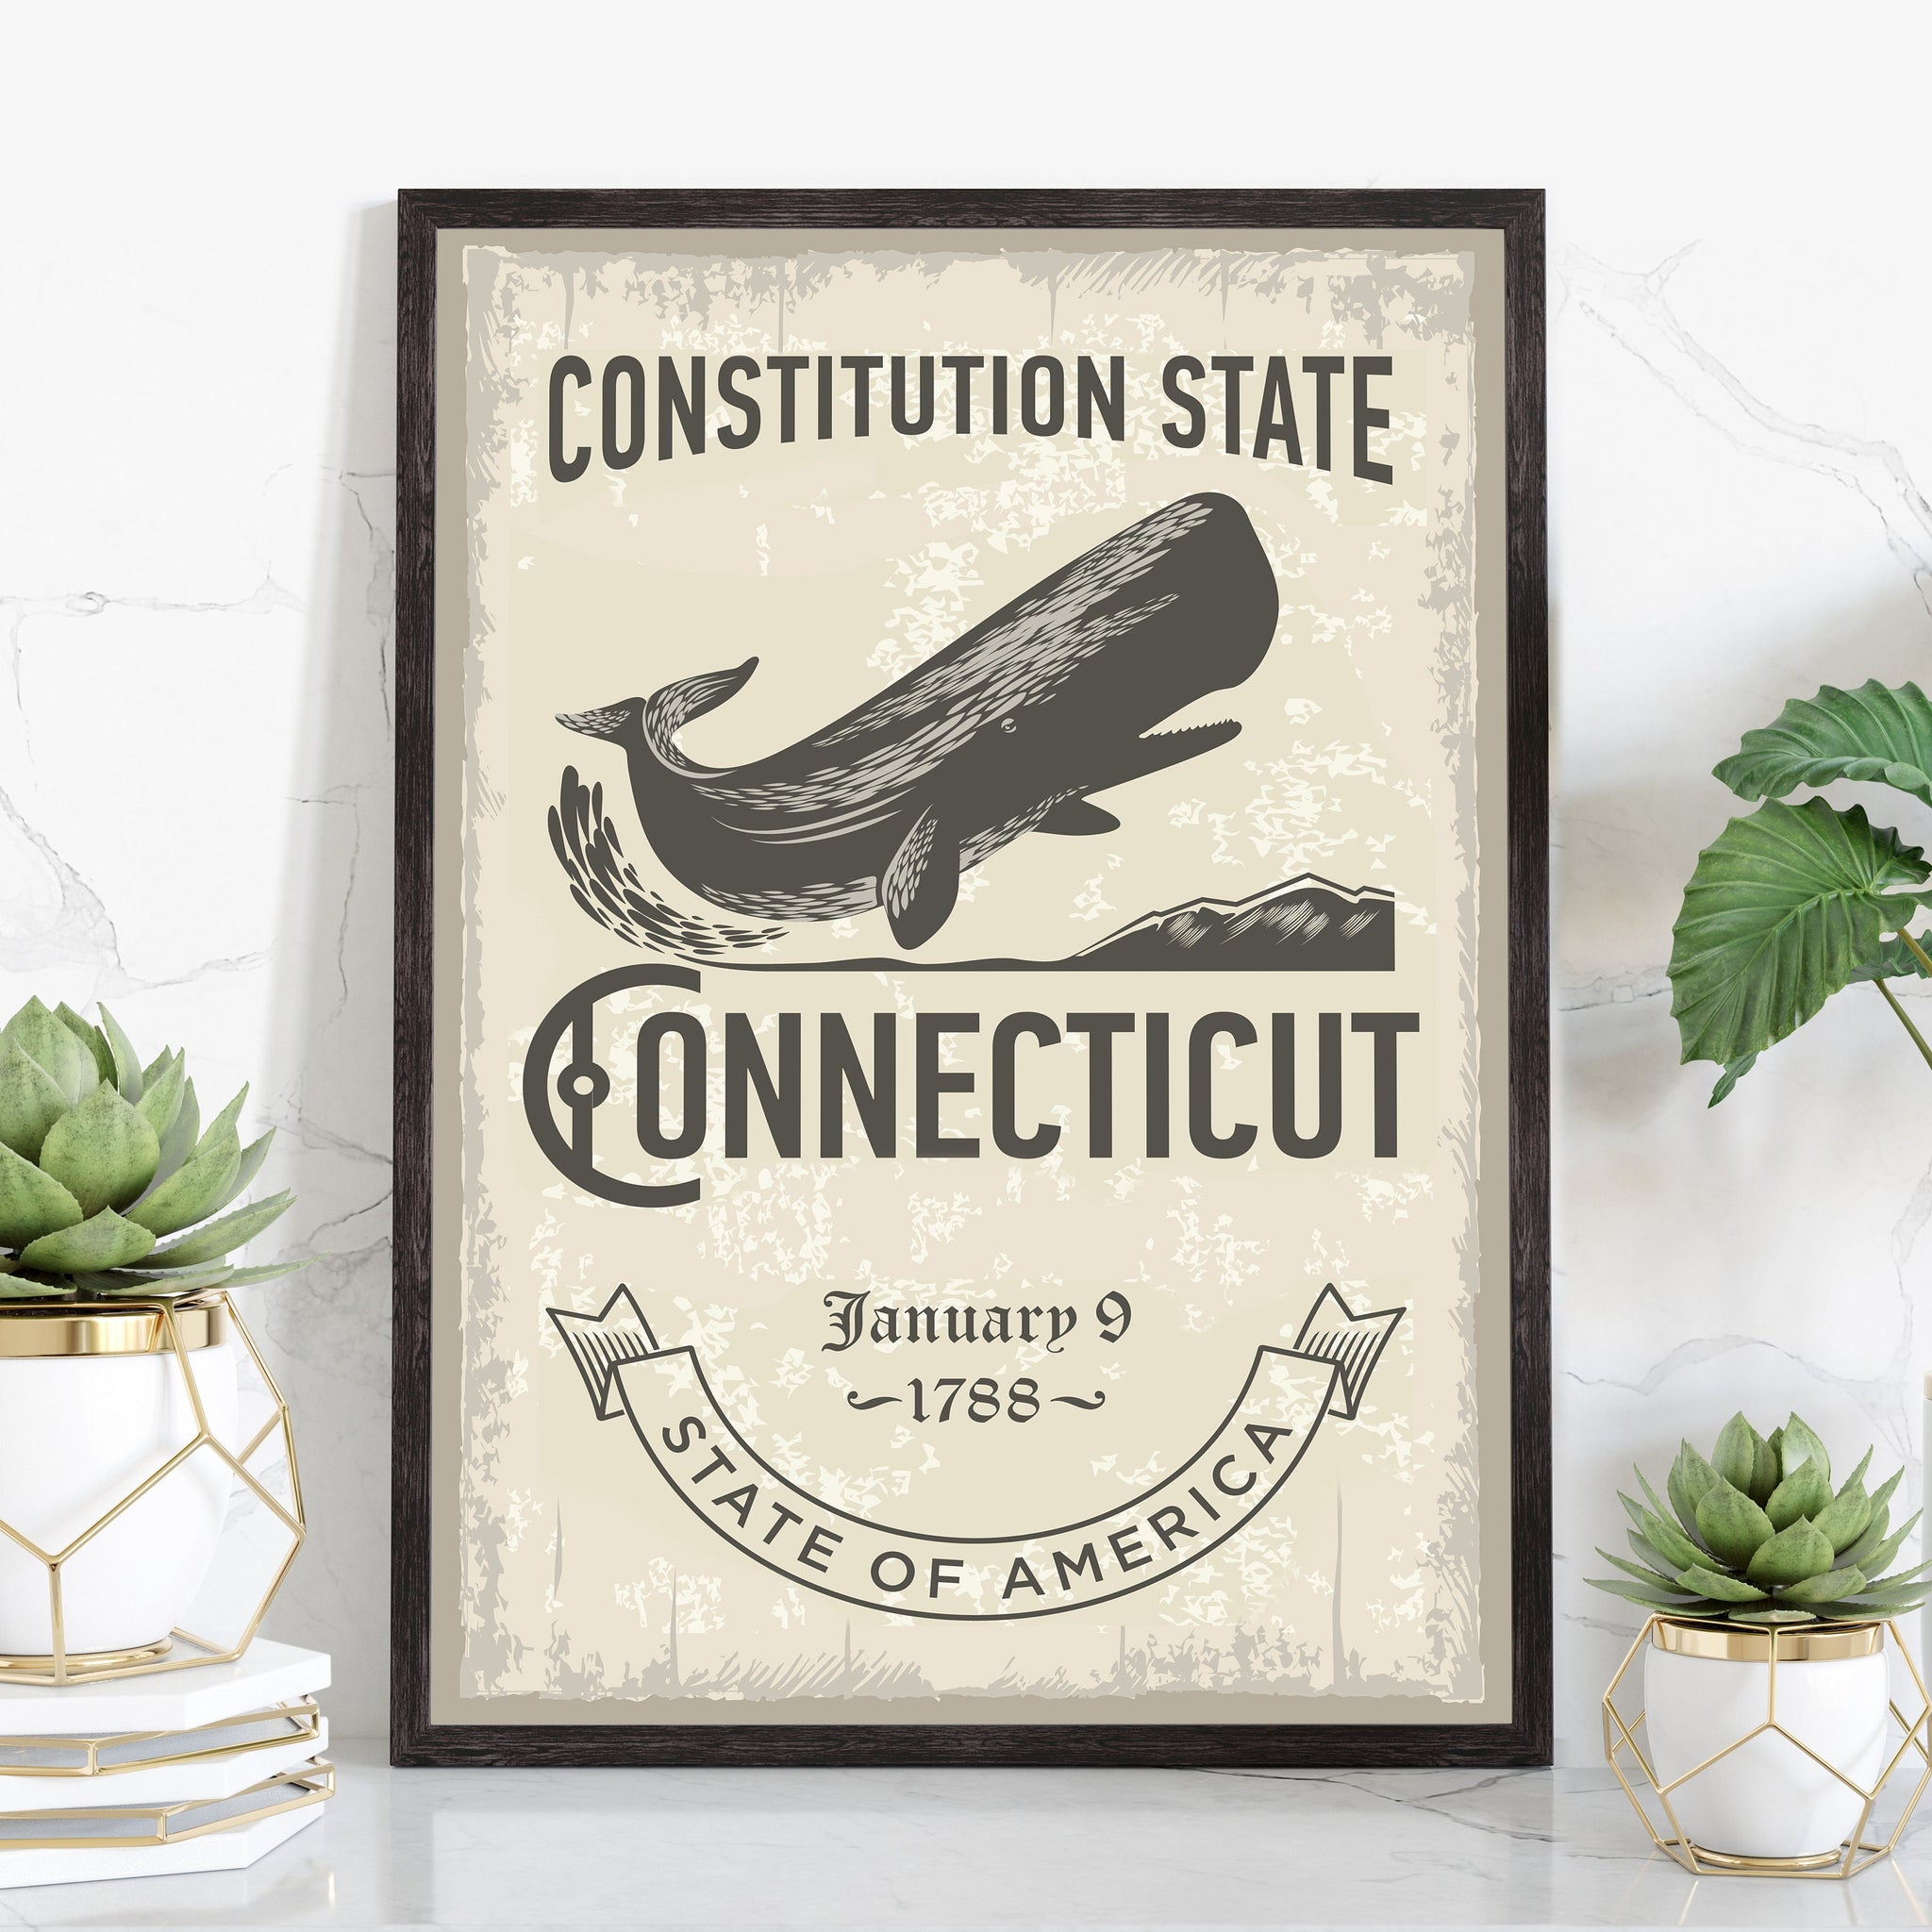 Connecticut State Symbol Poster, Connecticut State Poster Print, Connecticut State Emblem Poster, Retro Travel Poster, Home, Office Wall Art